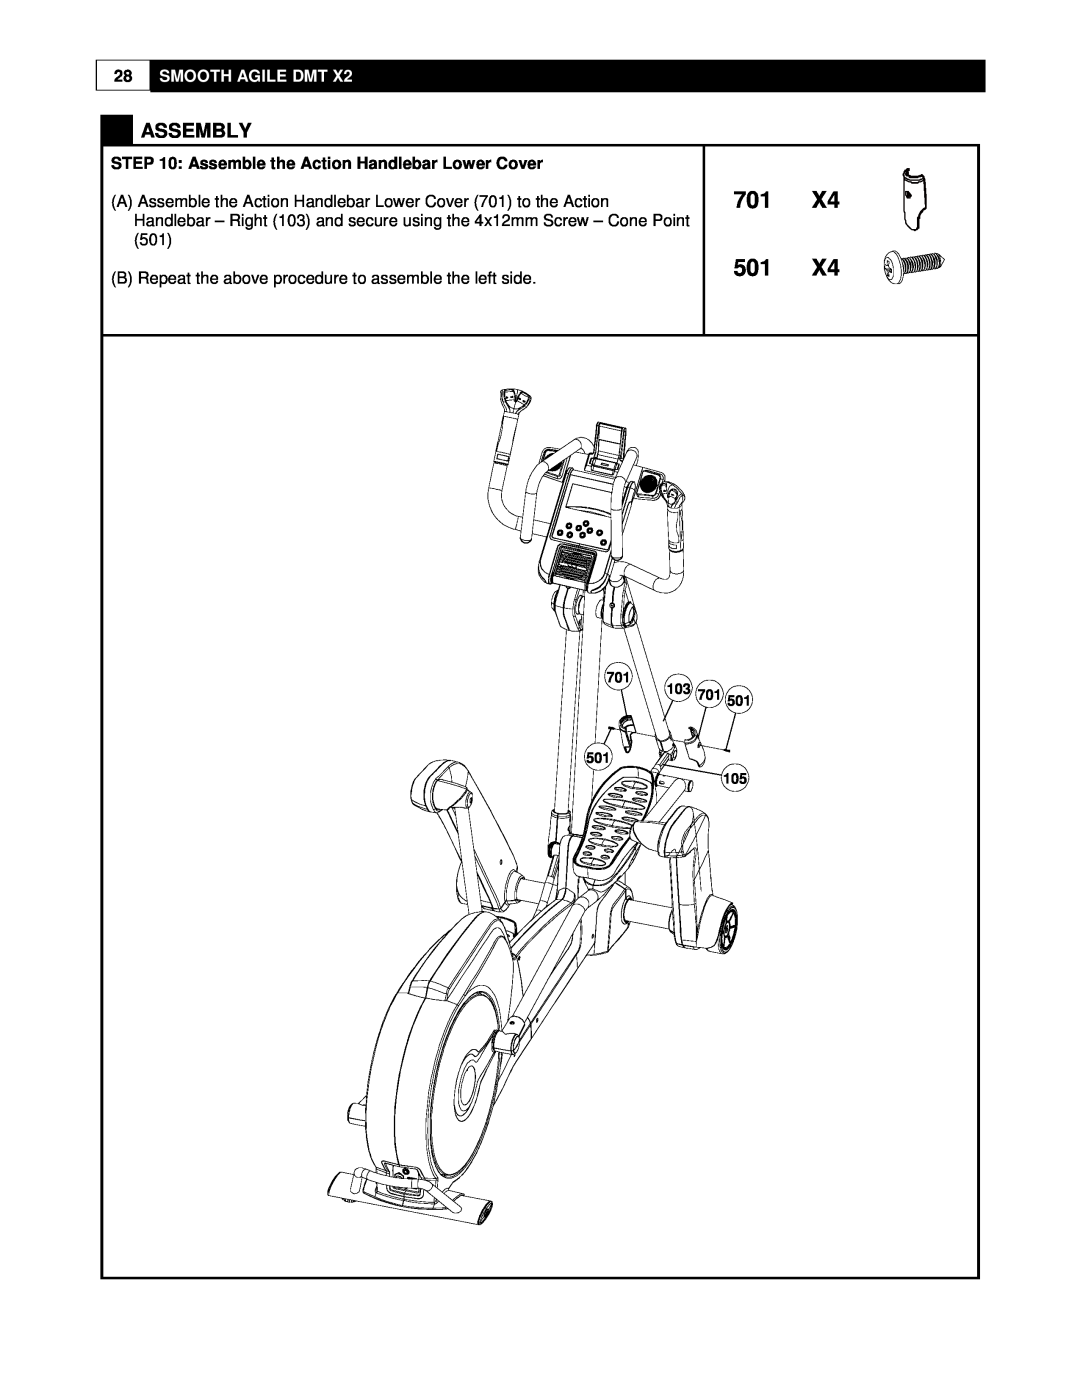 Smooth Fitness DMT X2 user manual 701 501, Assembly, Smooth Agile Dmt, Assemble the Action Handlebar Lower Cover 